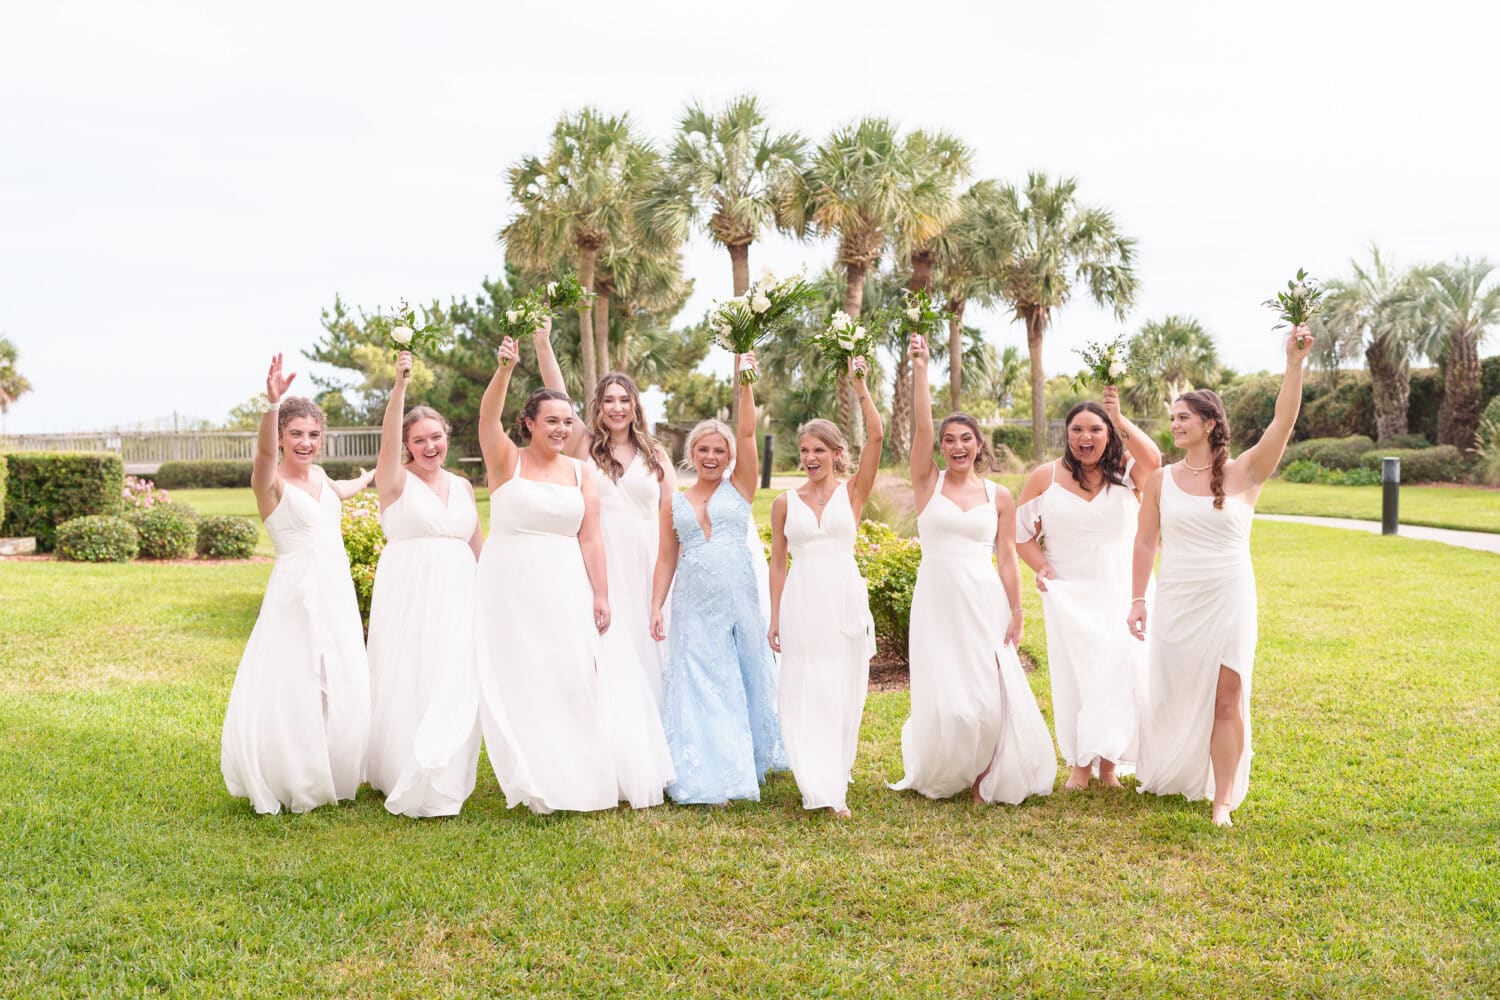 Bridesmaids holding flowers in the air - Hilton Myrtle Beach Resort